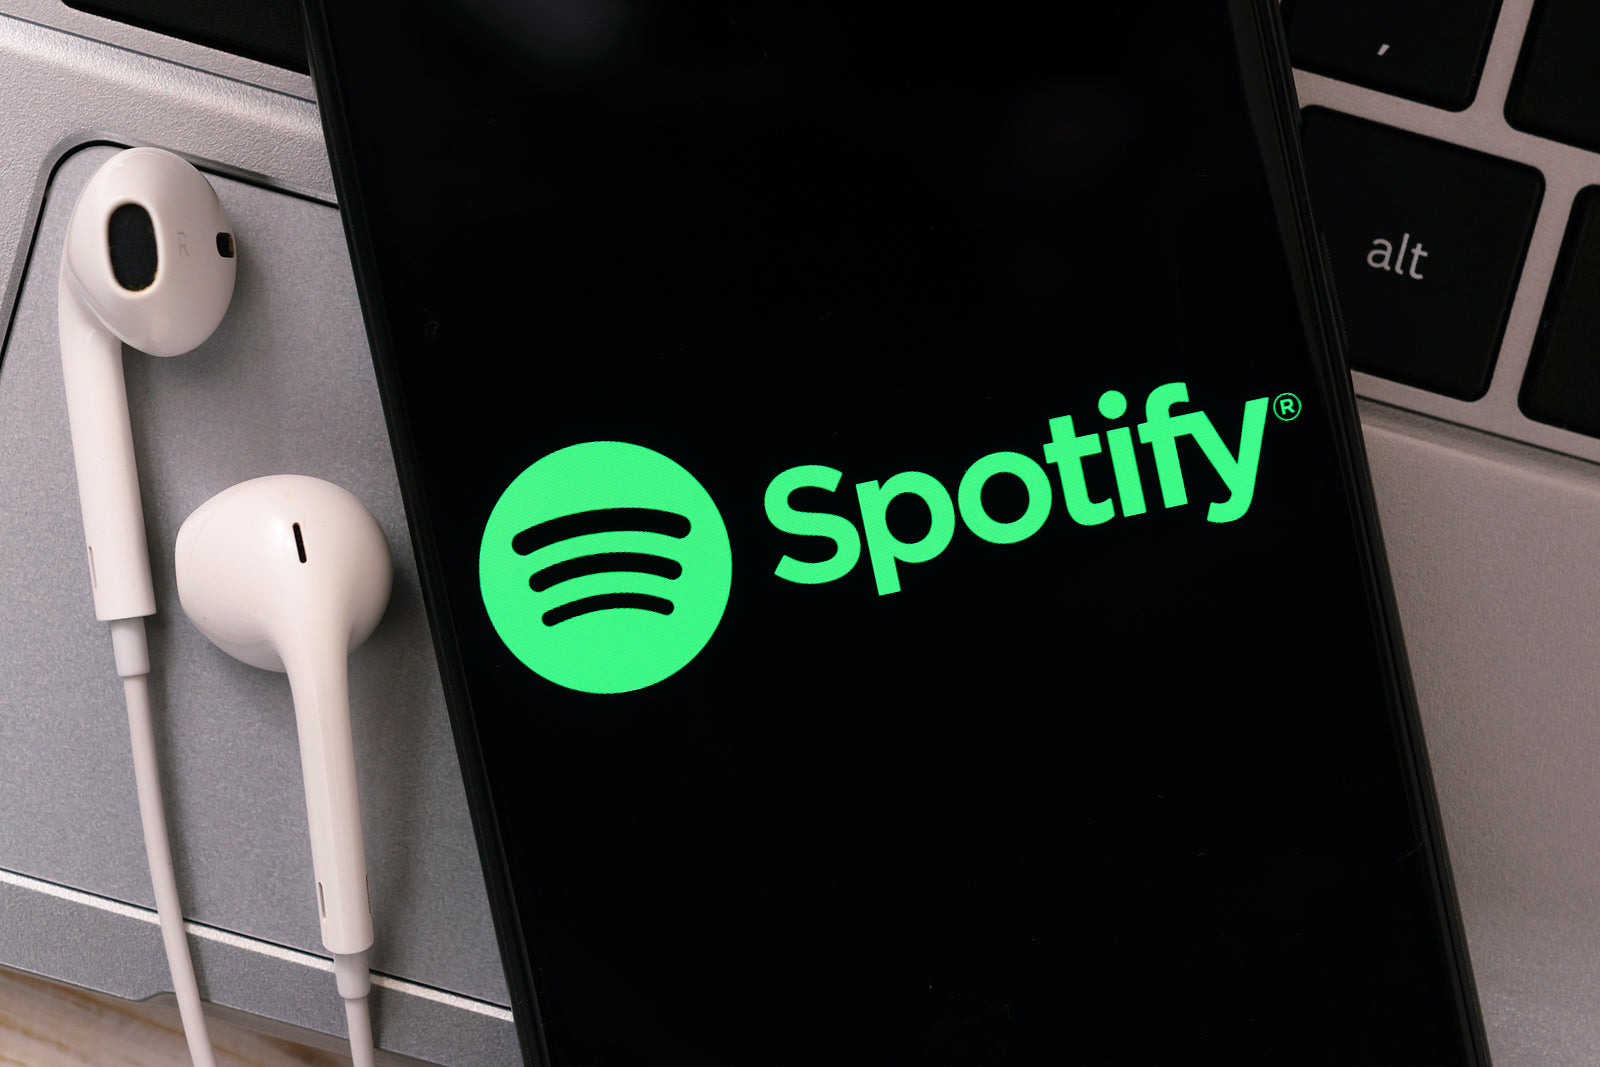 [Global] Higher than expected payroll taxes help Spotify swing into profit